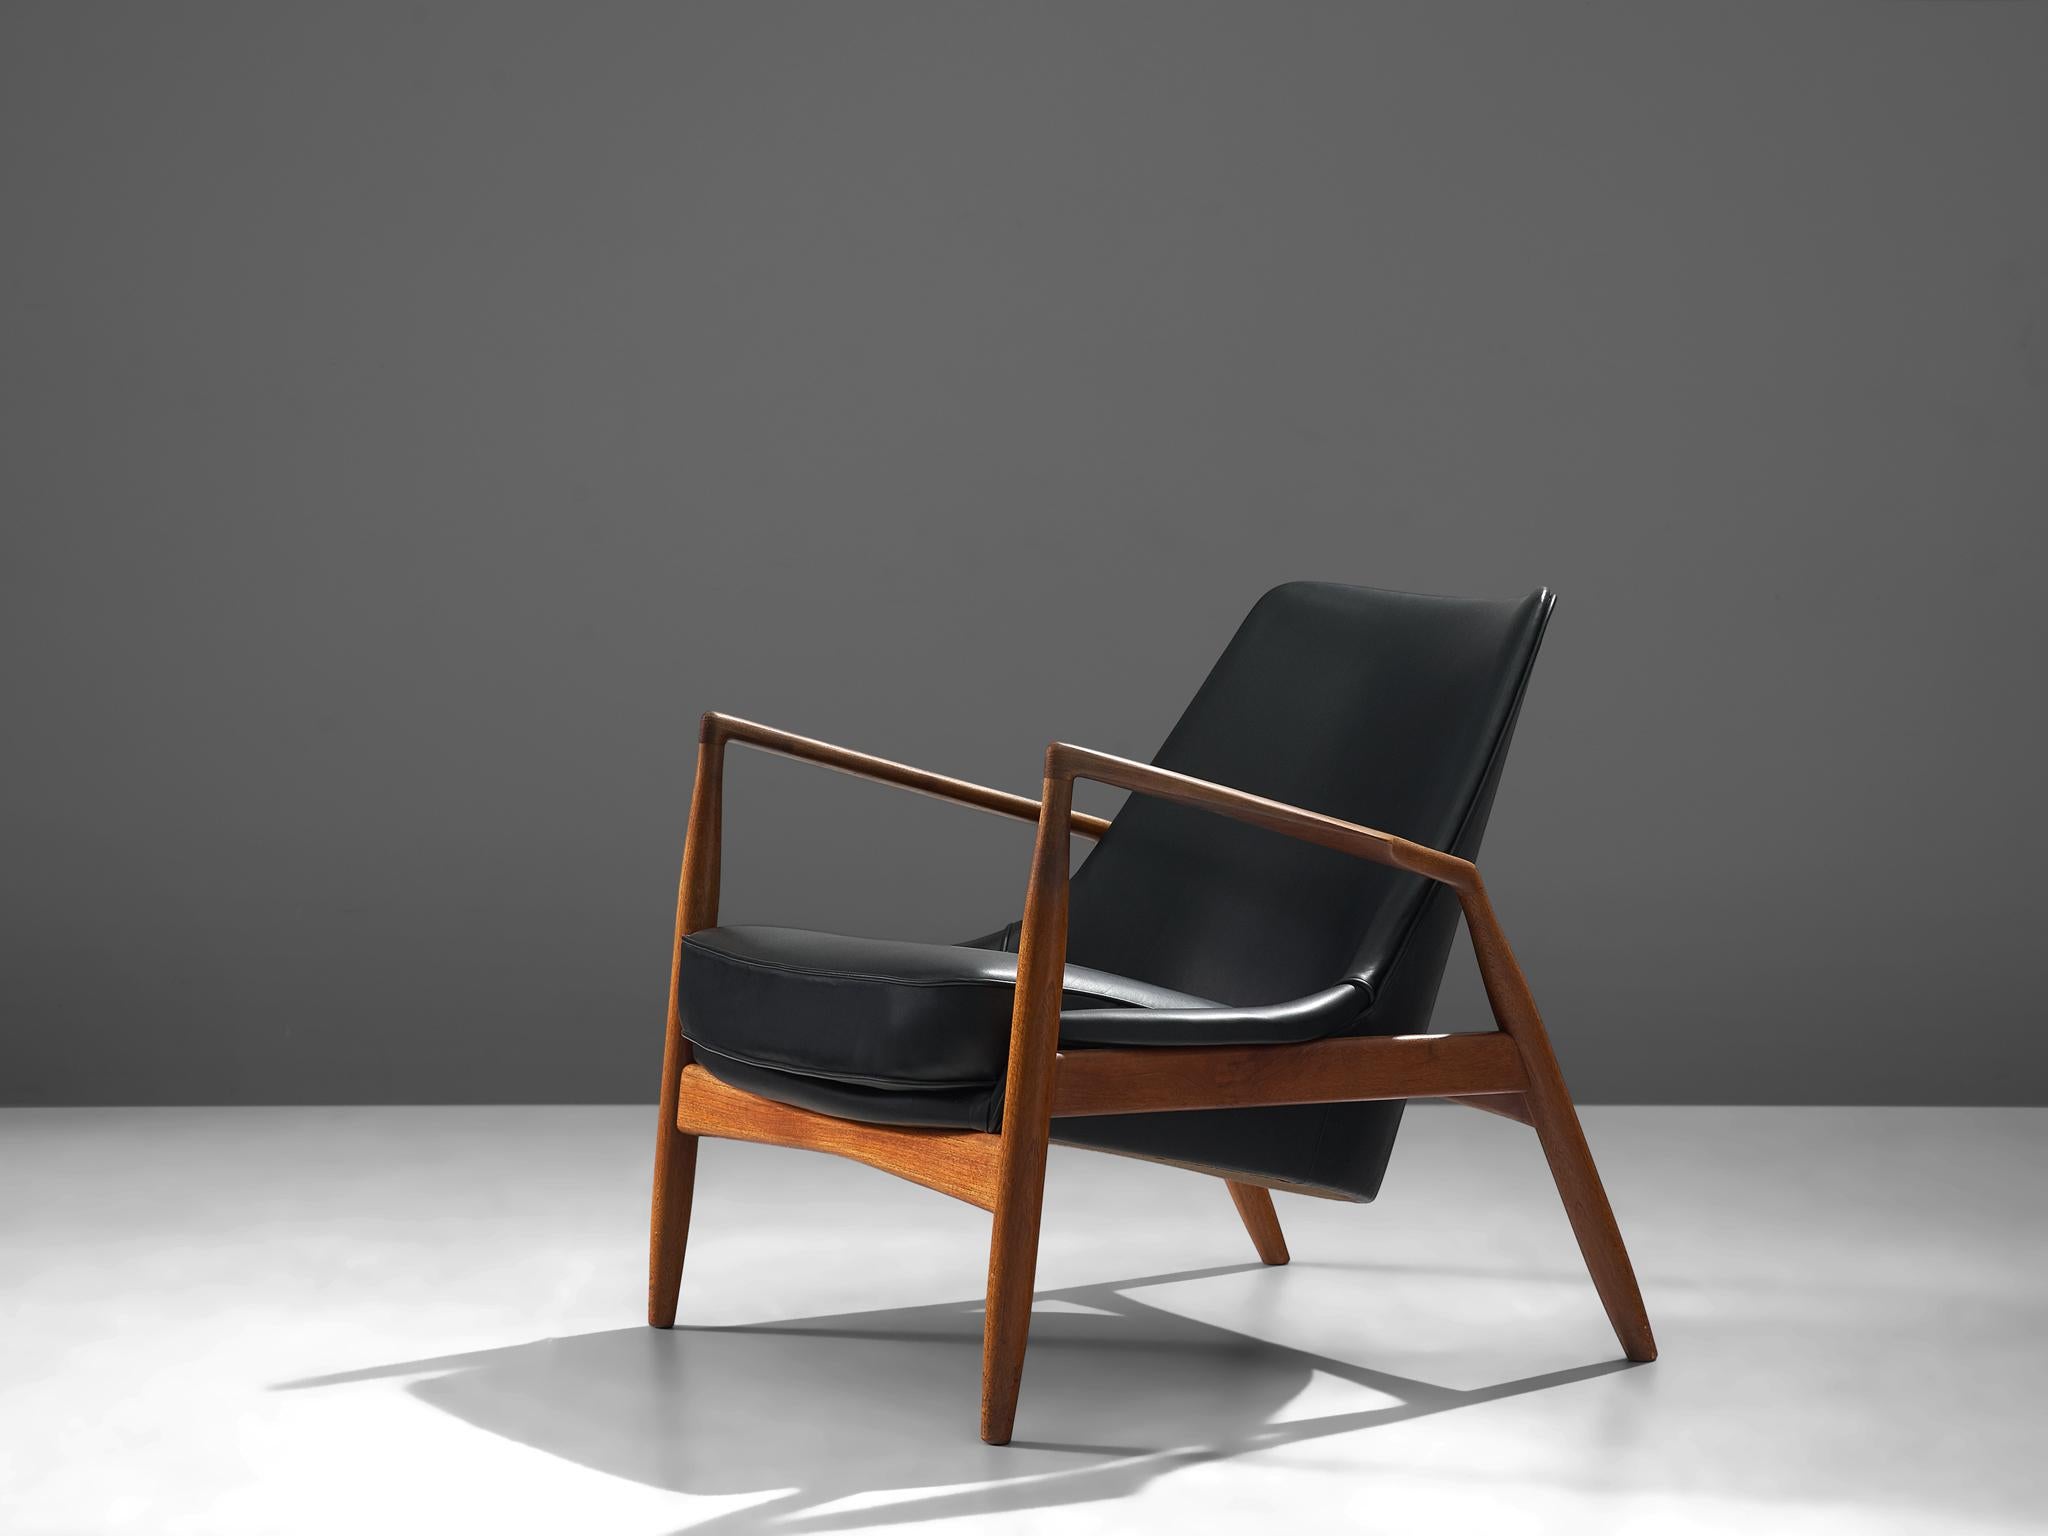 Ib Kofod-Larsen for OPE, 'Sälen' (Seal) lounge chair model 503-799, teak and leather, Sweden, 1956. 

Iconic seal lounge chair, by Ik Kofod-Larsen. The well-crafted frame of this chair is made of a light colored teak. It shows very nice details and